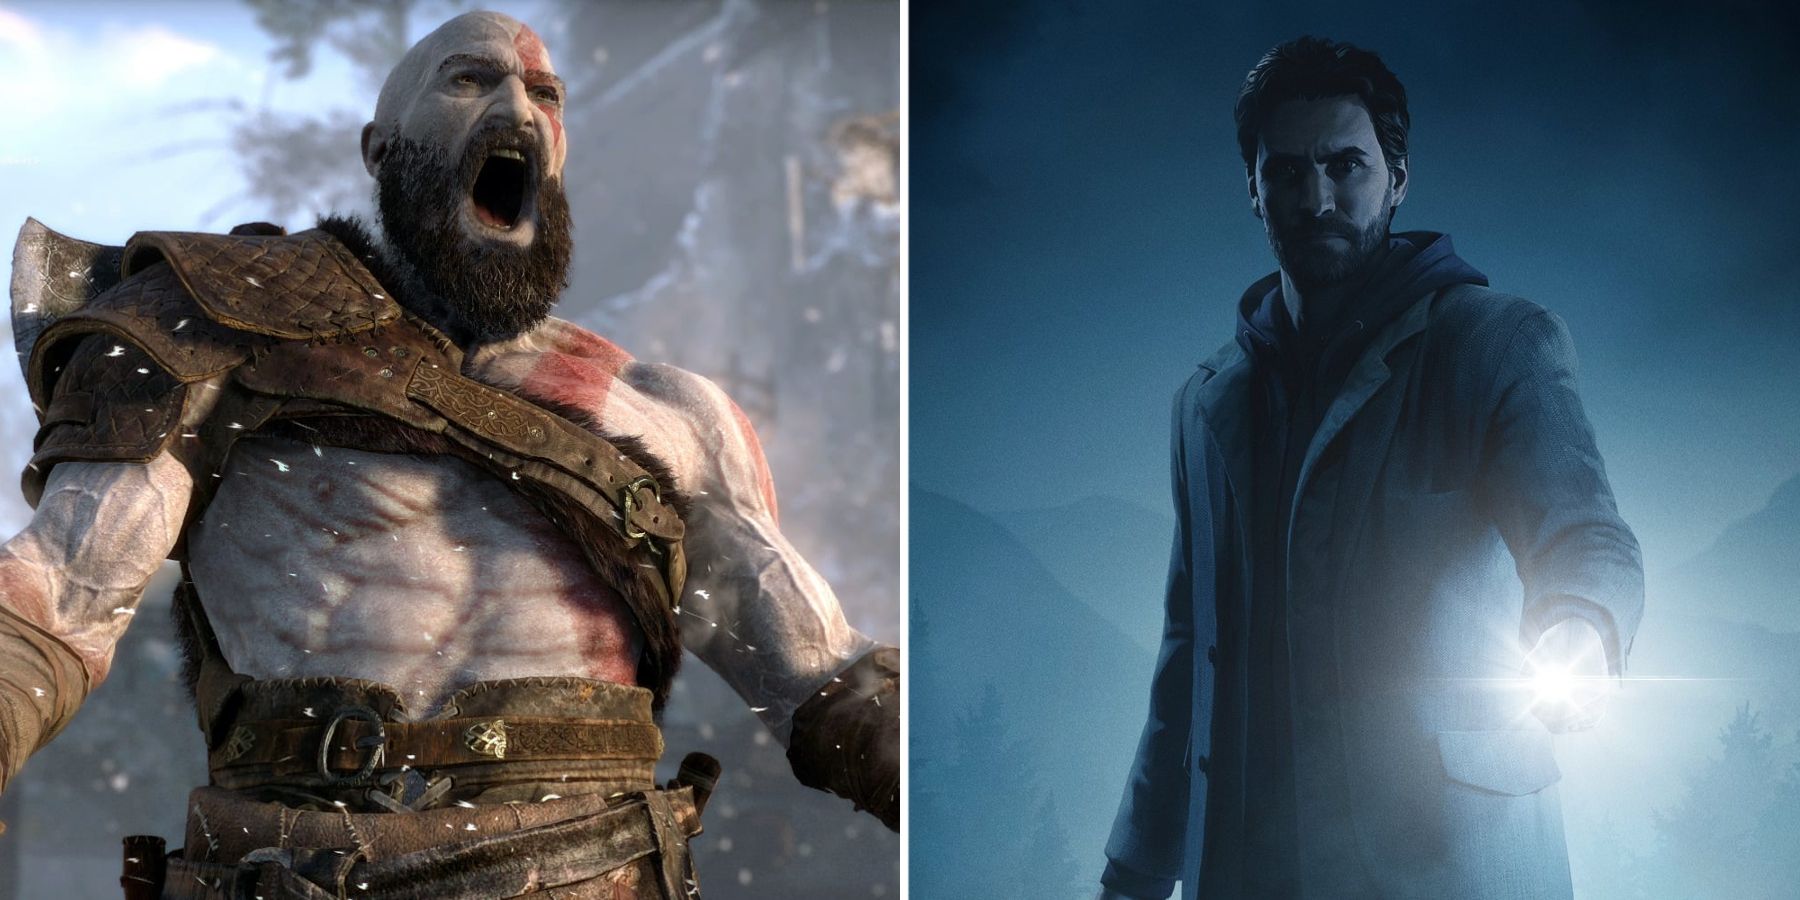 Kratos screams in God of War (2018) and Alan Wake shines his flashlight on the cover of Alan Wake